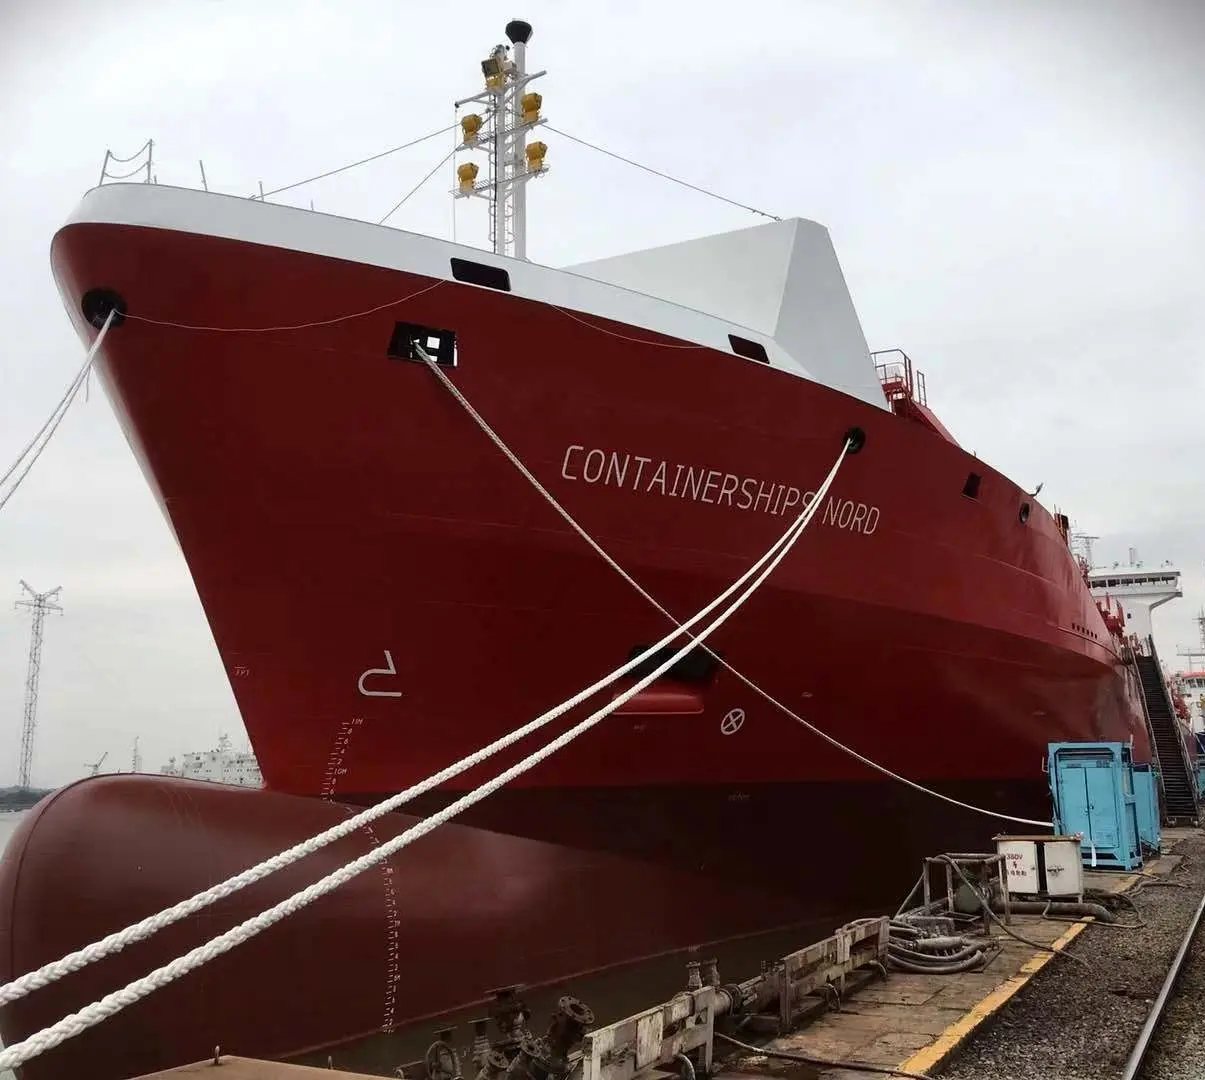 The CMA CGM Group has taken delivery of its first LNG-powered vessel through its subsidiary Containerships